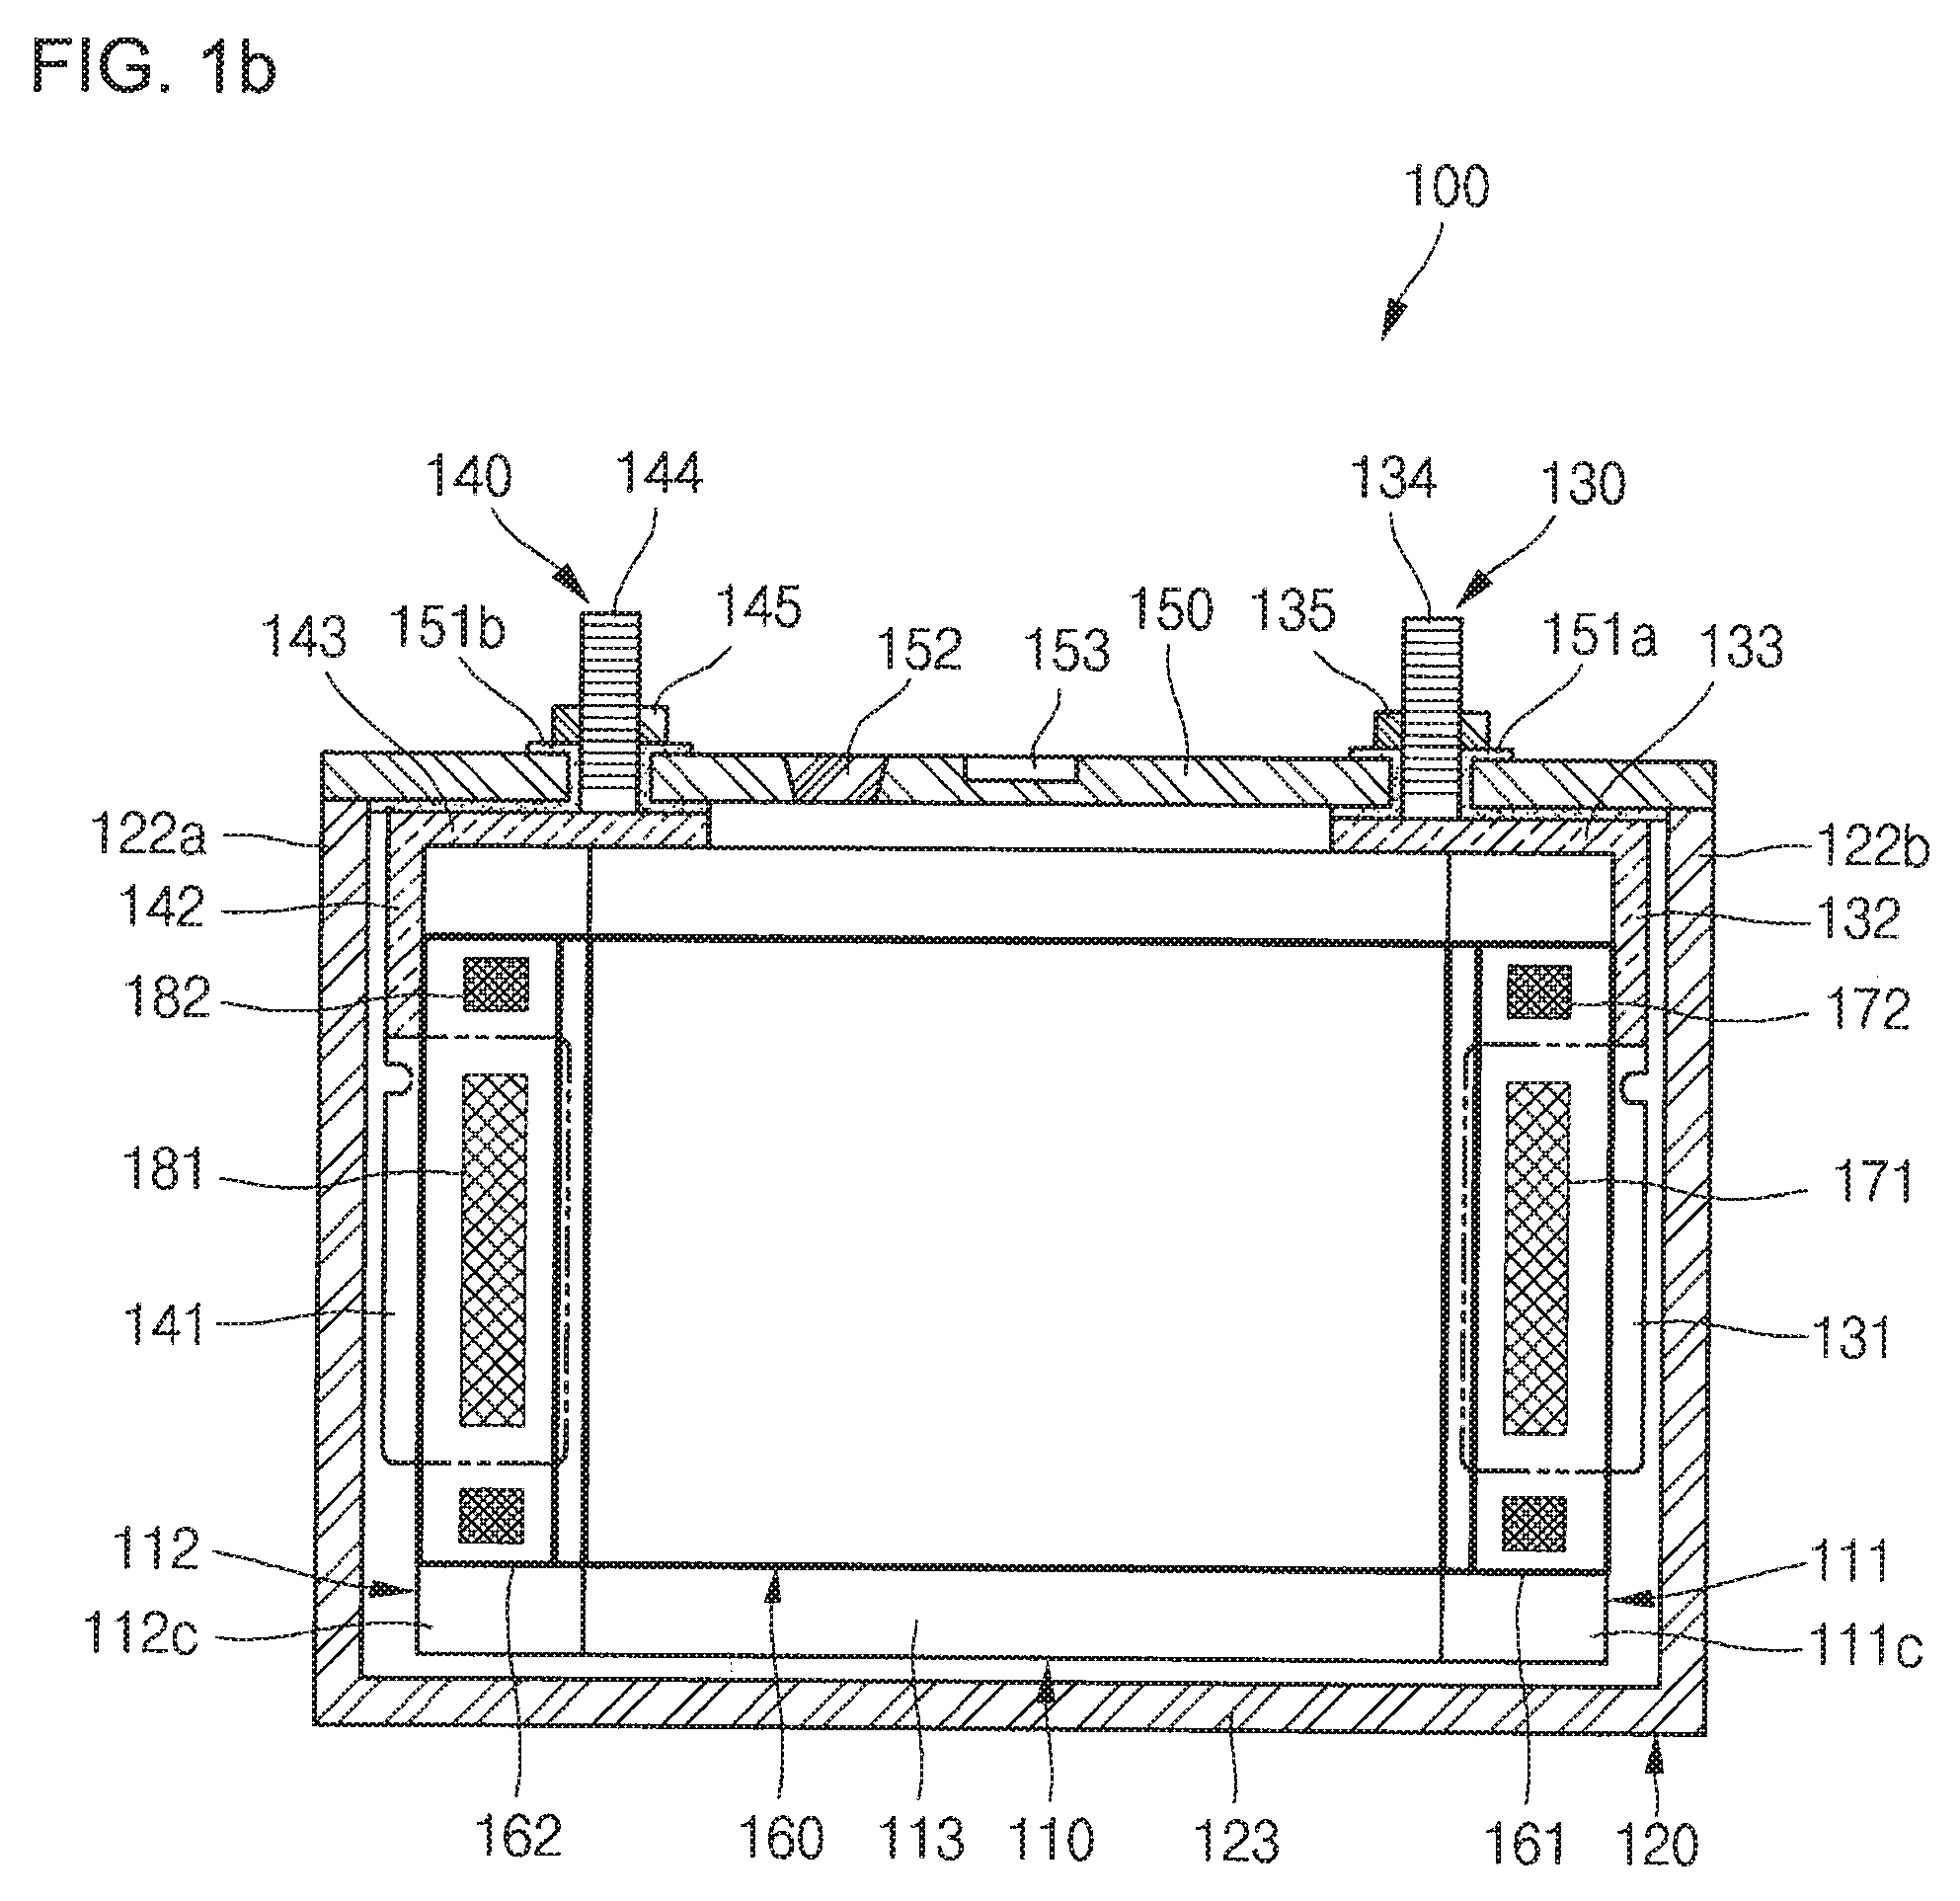 Rechargeable secondary battery having improved safety against puncture and collapse